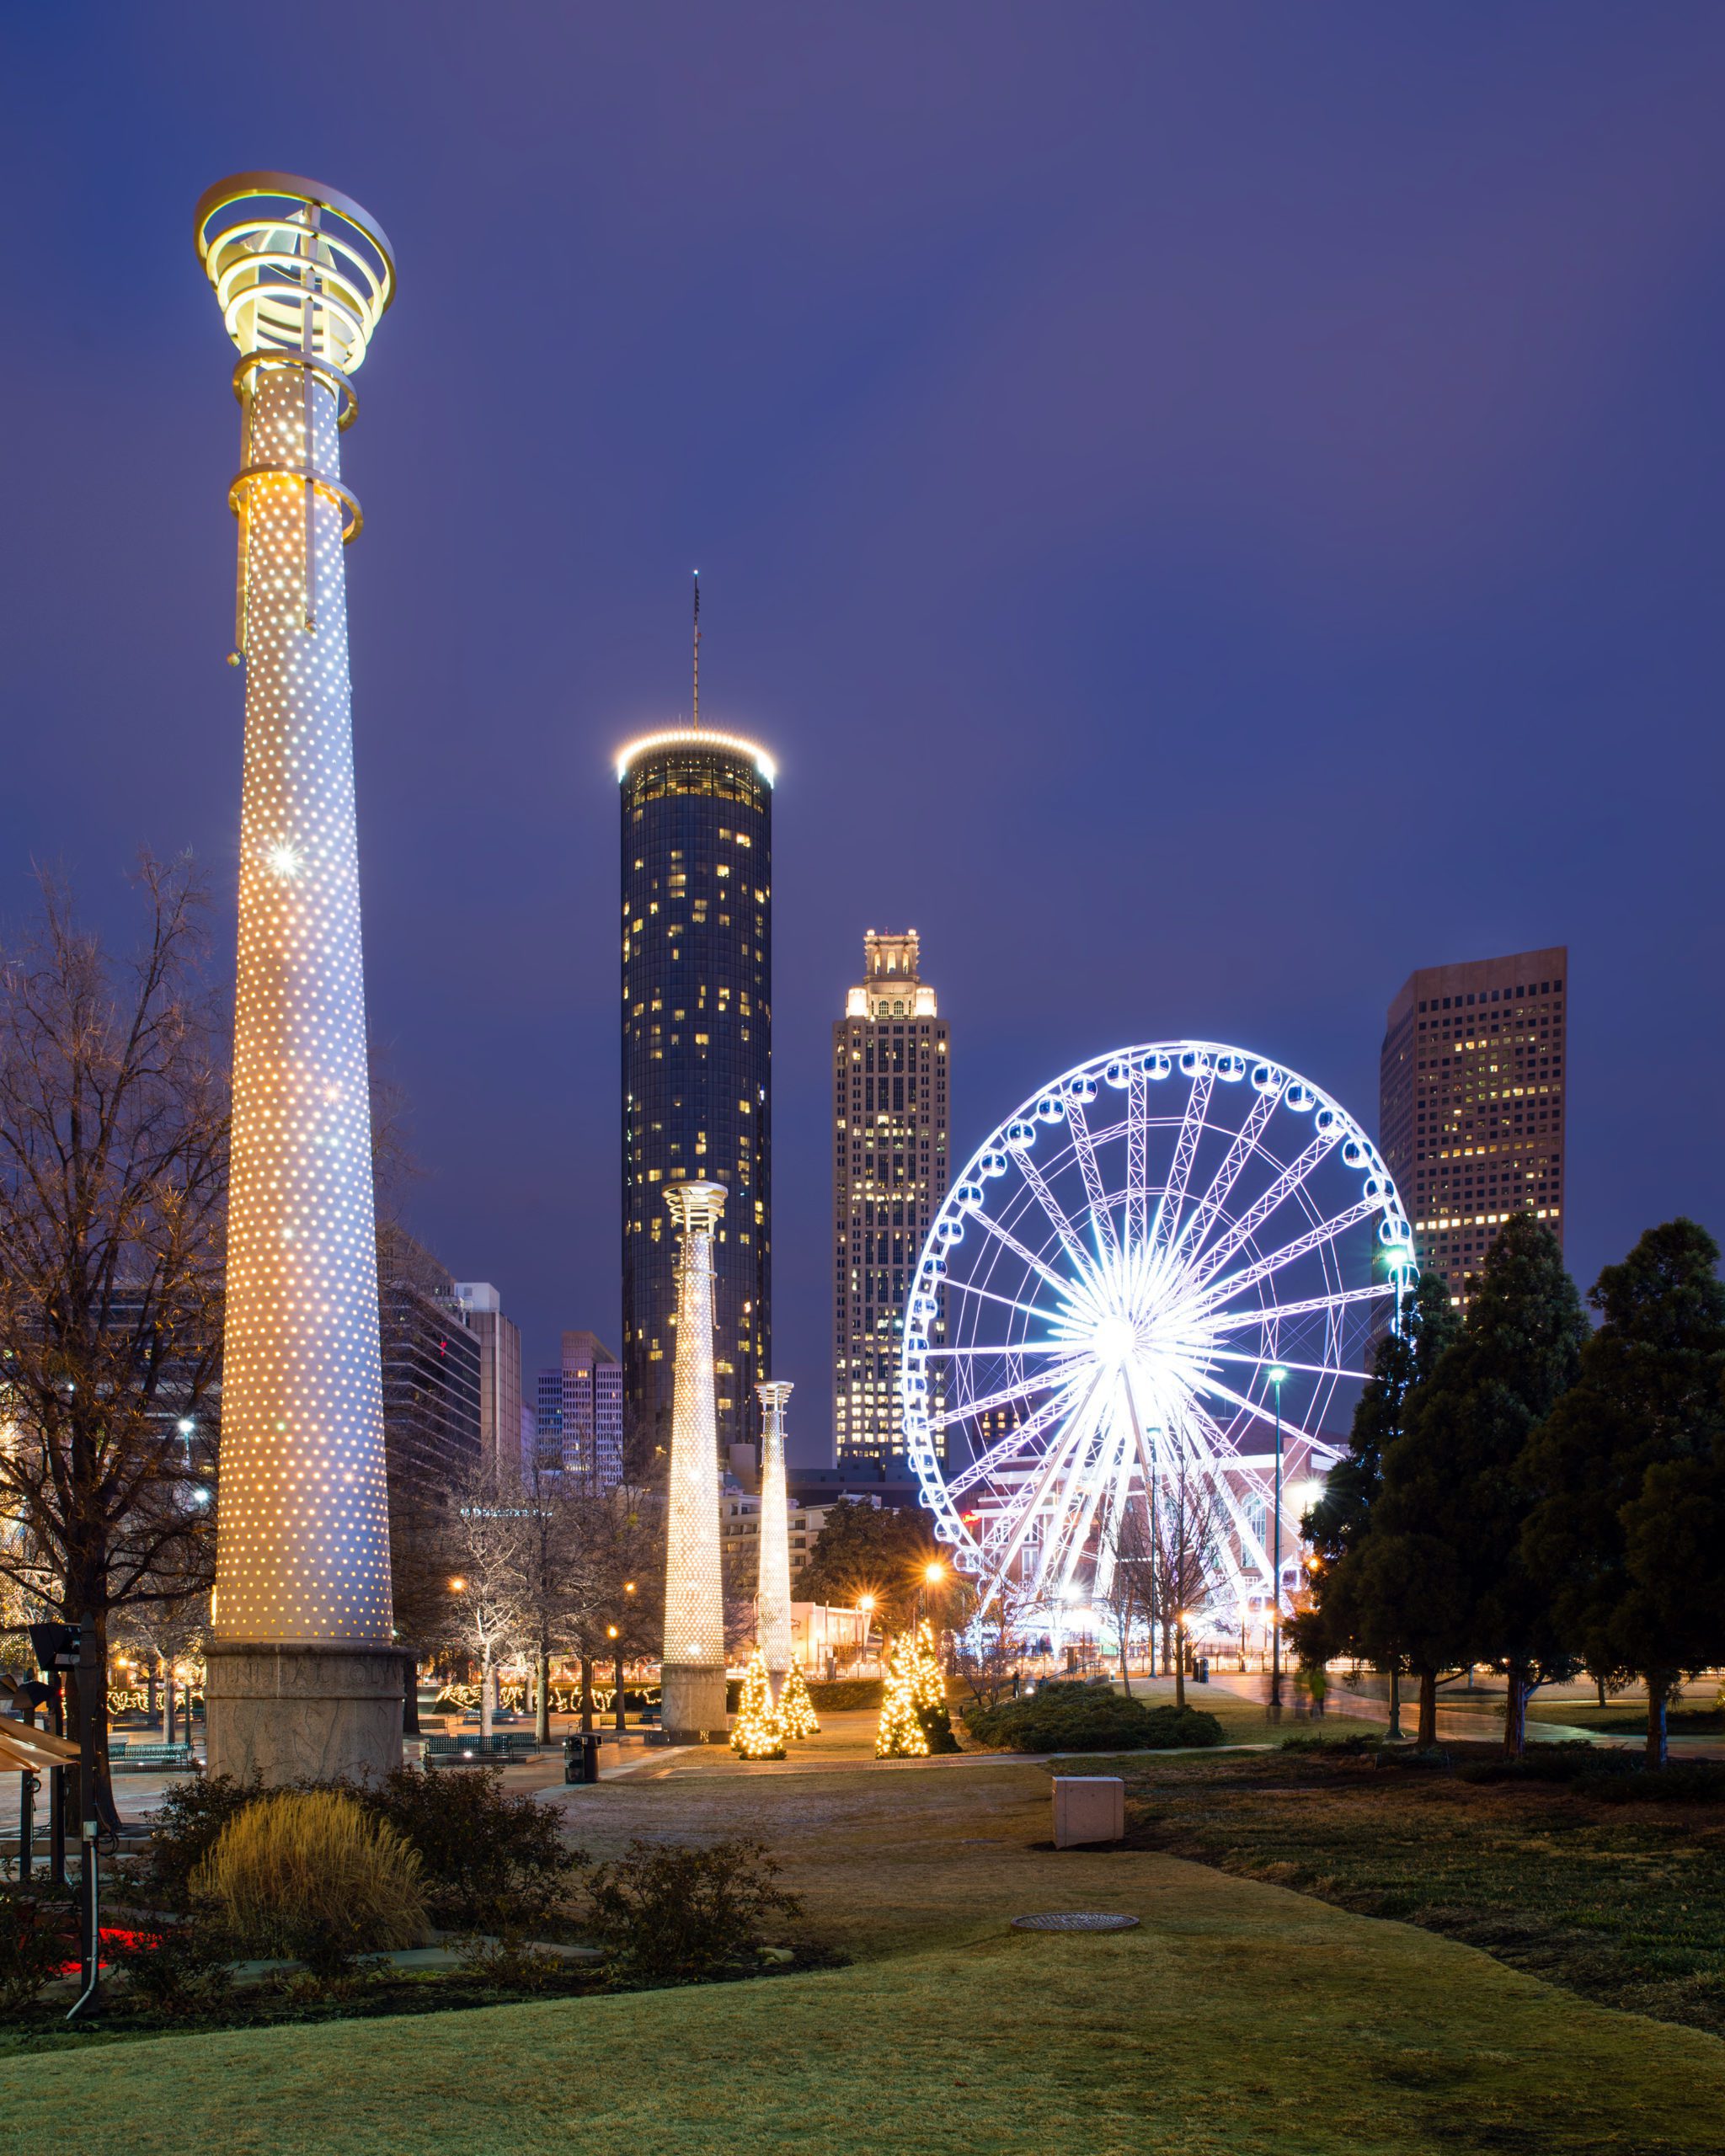 Light Tower Architectural Sculptures and Sky View Atlanta Ferris Wheel